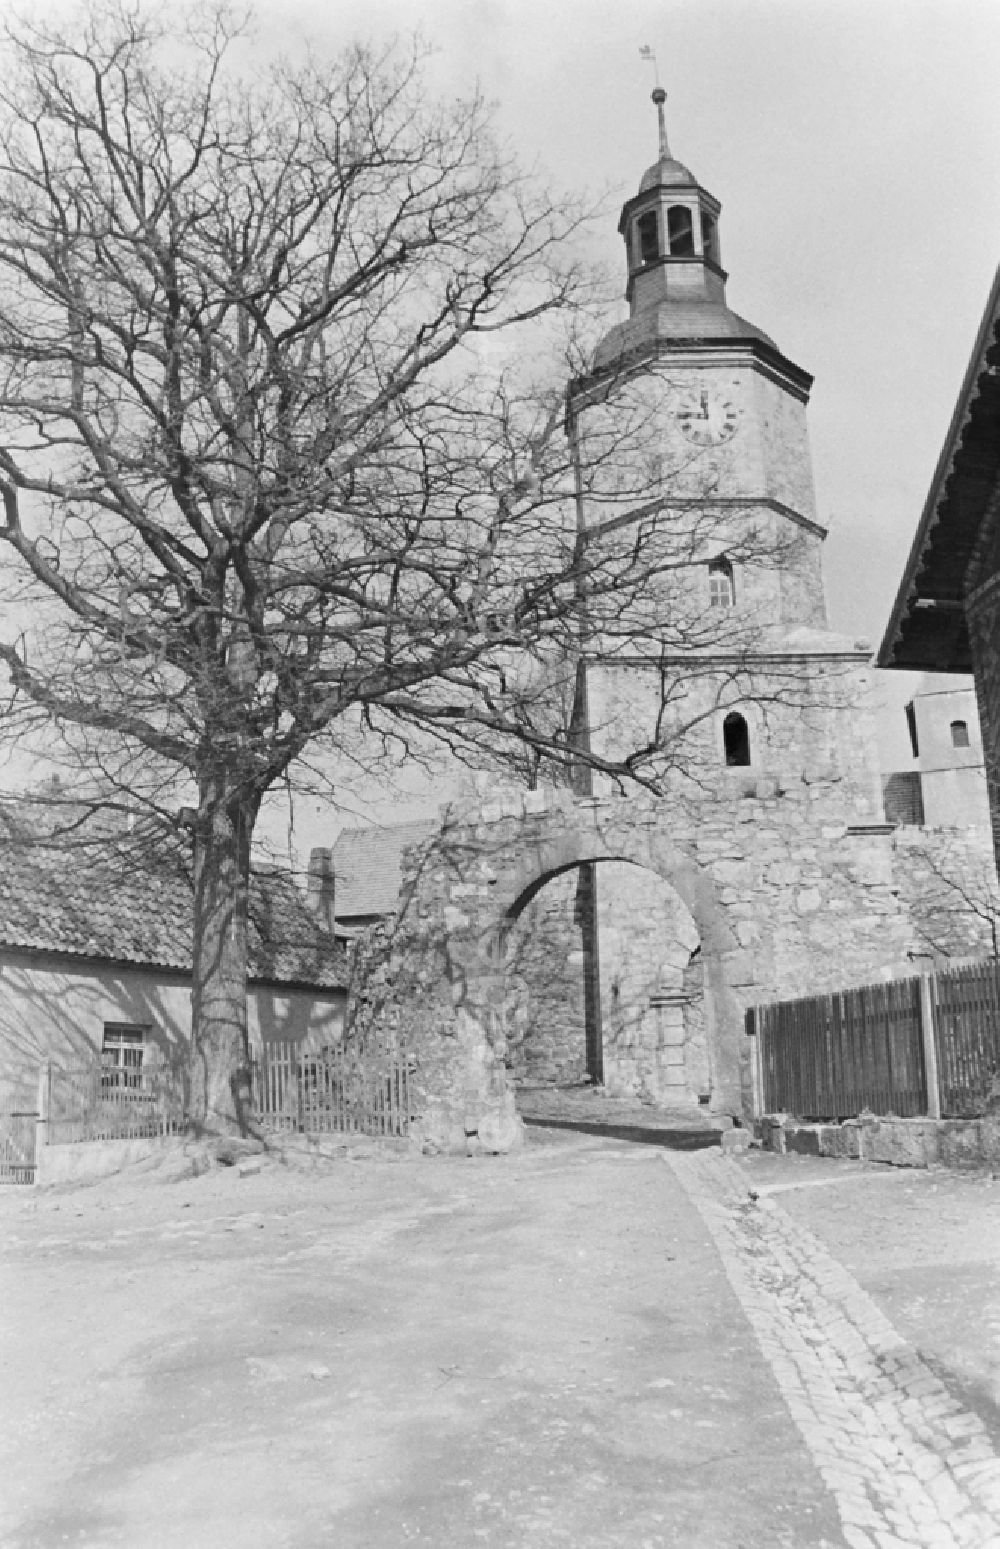 GDR photo archive: Rohr - A village called Rohr in the state Thuringia on the territory of the former GDR, German Democratic Republic